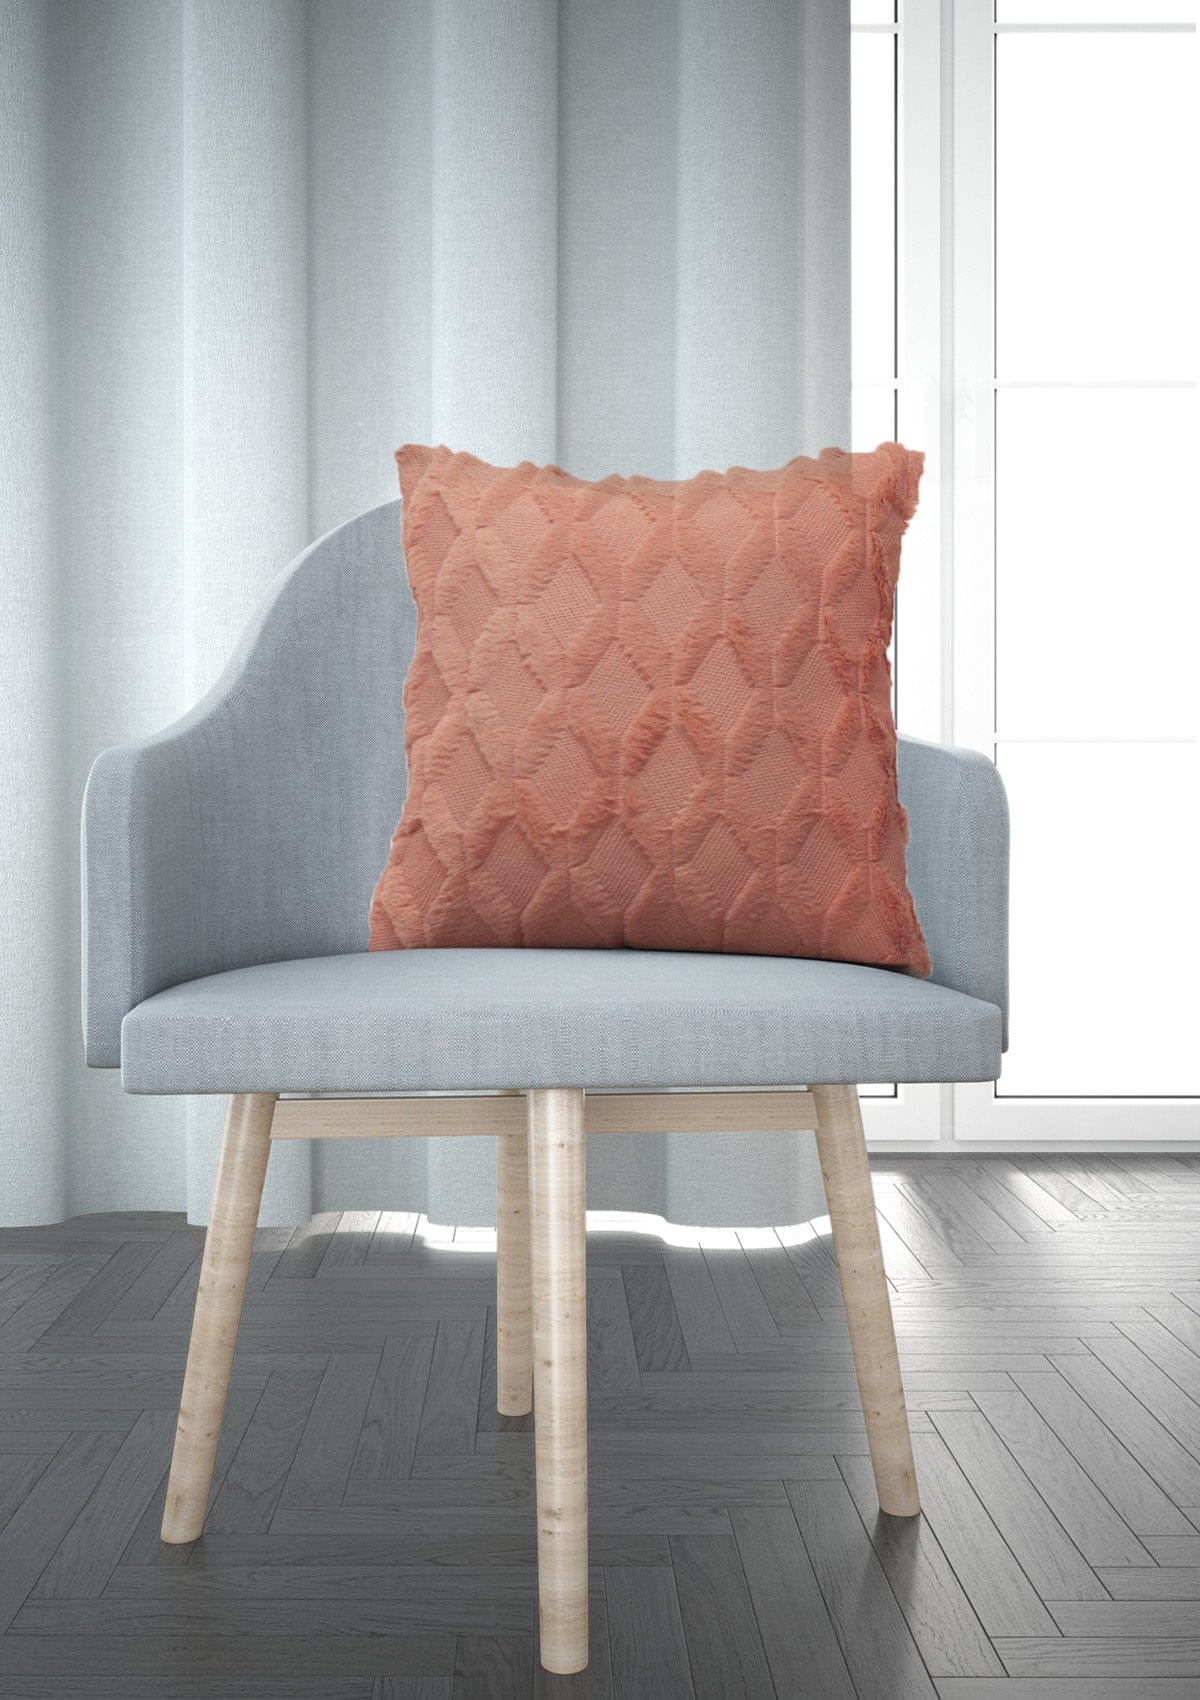 Red Accents Fluffy Cushion Covers | CovermyCushion 30x50cm / Coral Red / No thanks - cover only